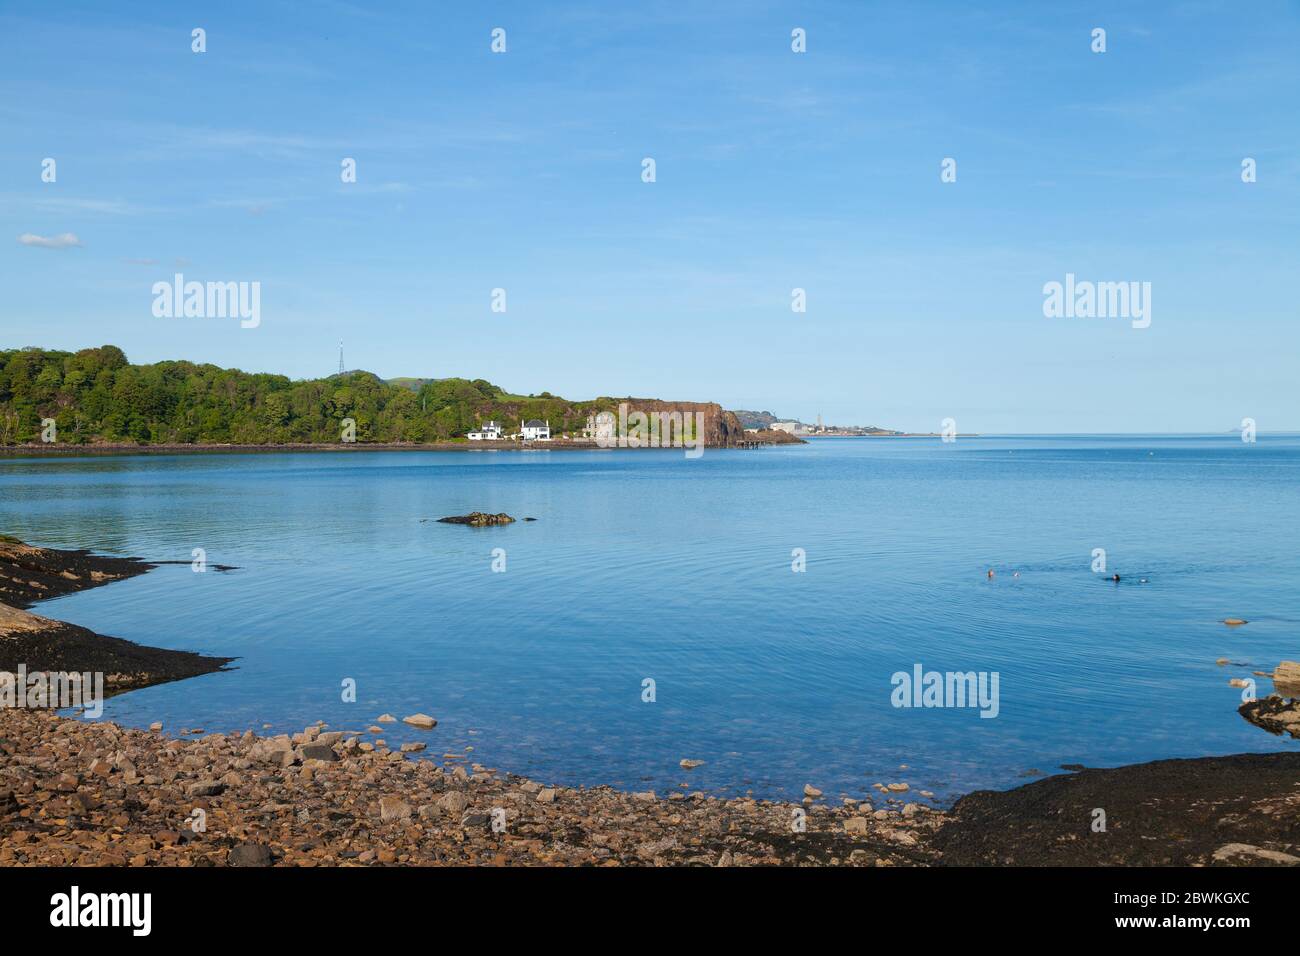 Two people swimming in a flat clam sea at Aberdour, Fife, Scotland. Stock Photo